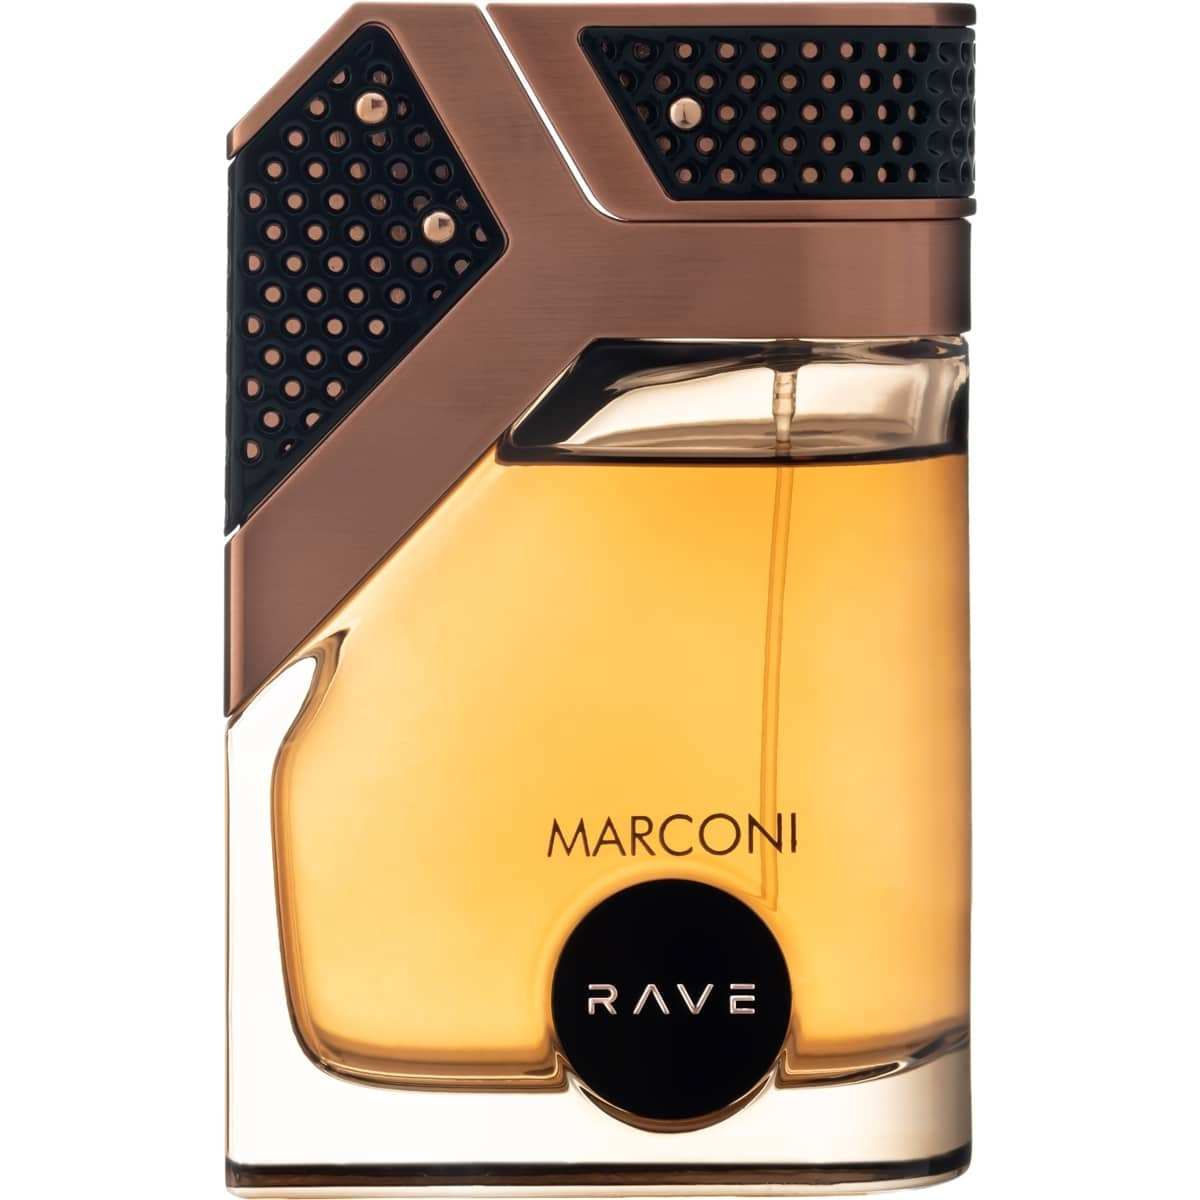 Shop For Rave Perfume Online At Best Prices In India